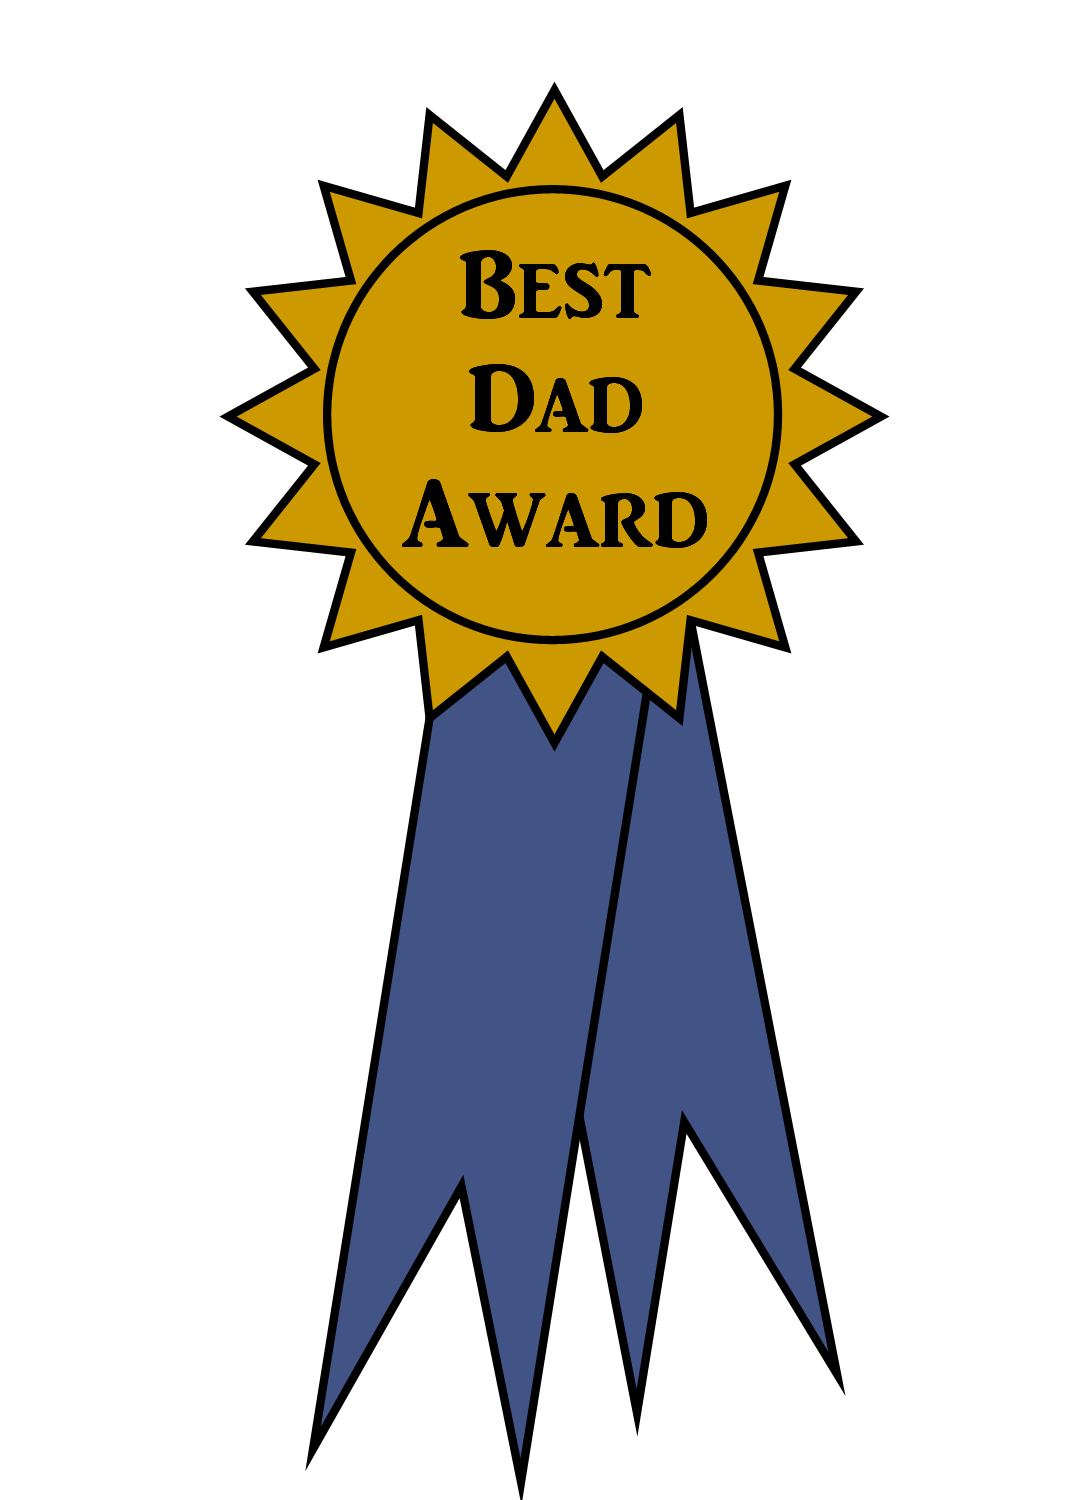 Awards day free clipart